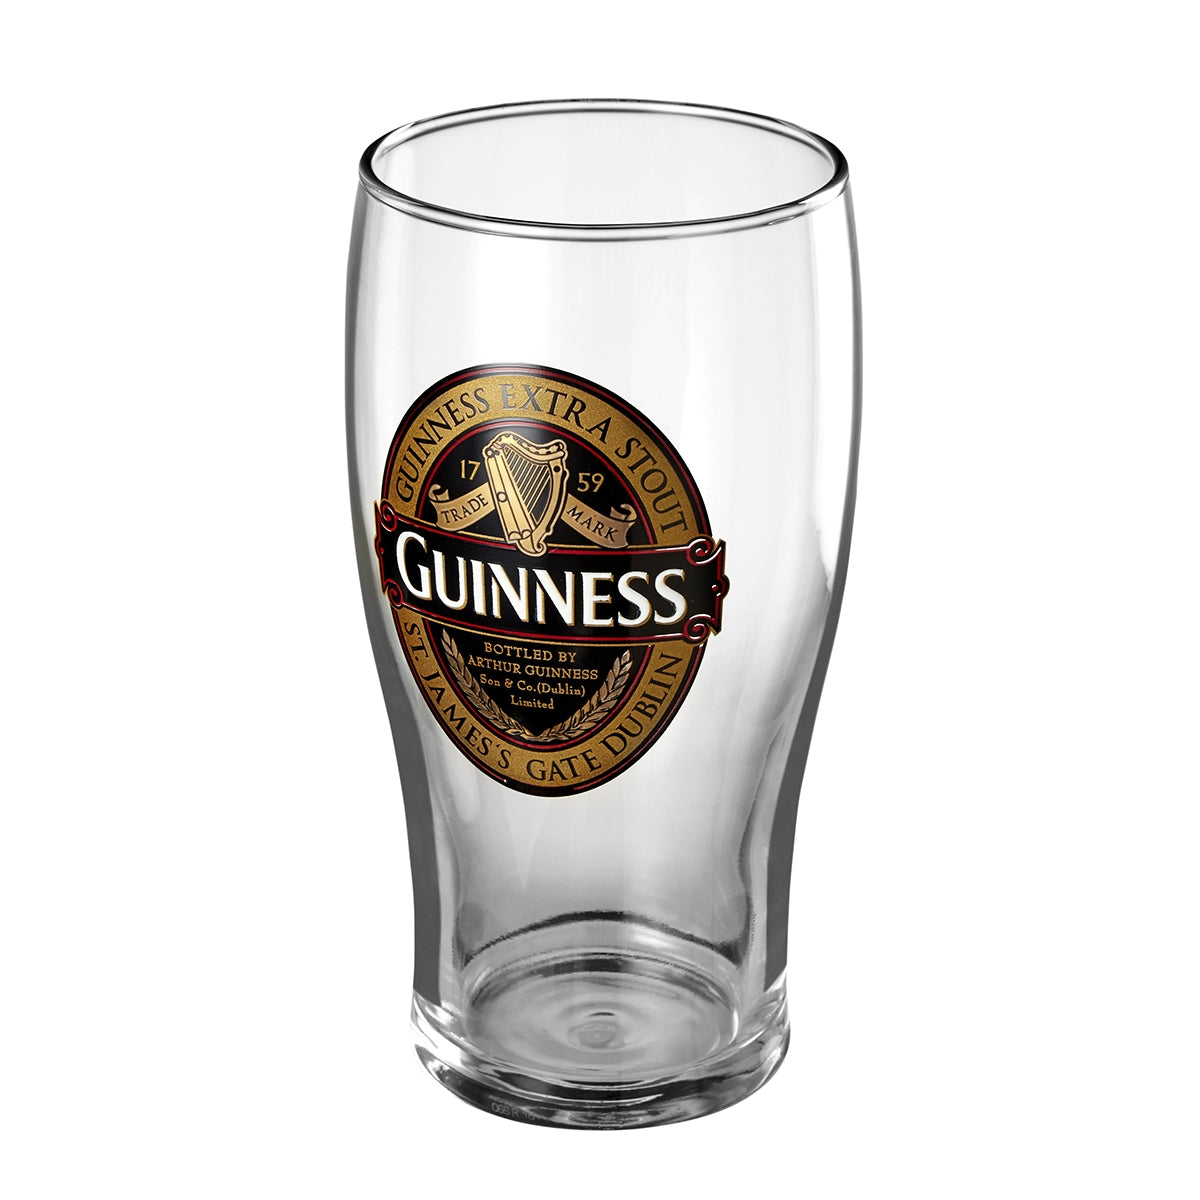 This Guinness UK Classic Collection Pint Glass proudly features the iconic Extra Stout Label. Enjoy your favorite brew in style with this authentic Guinness UK Classic Collection Pint Glass.